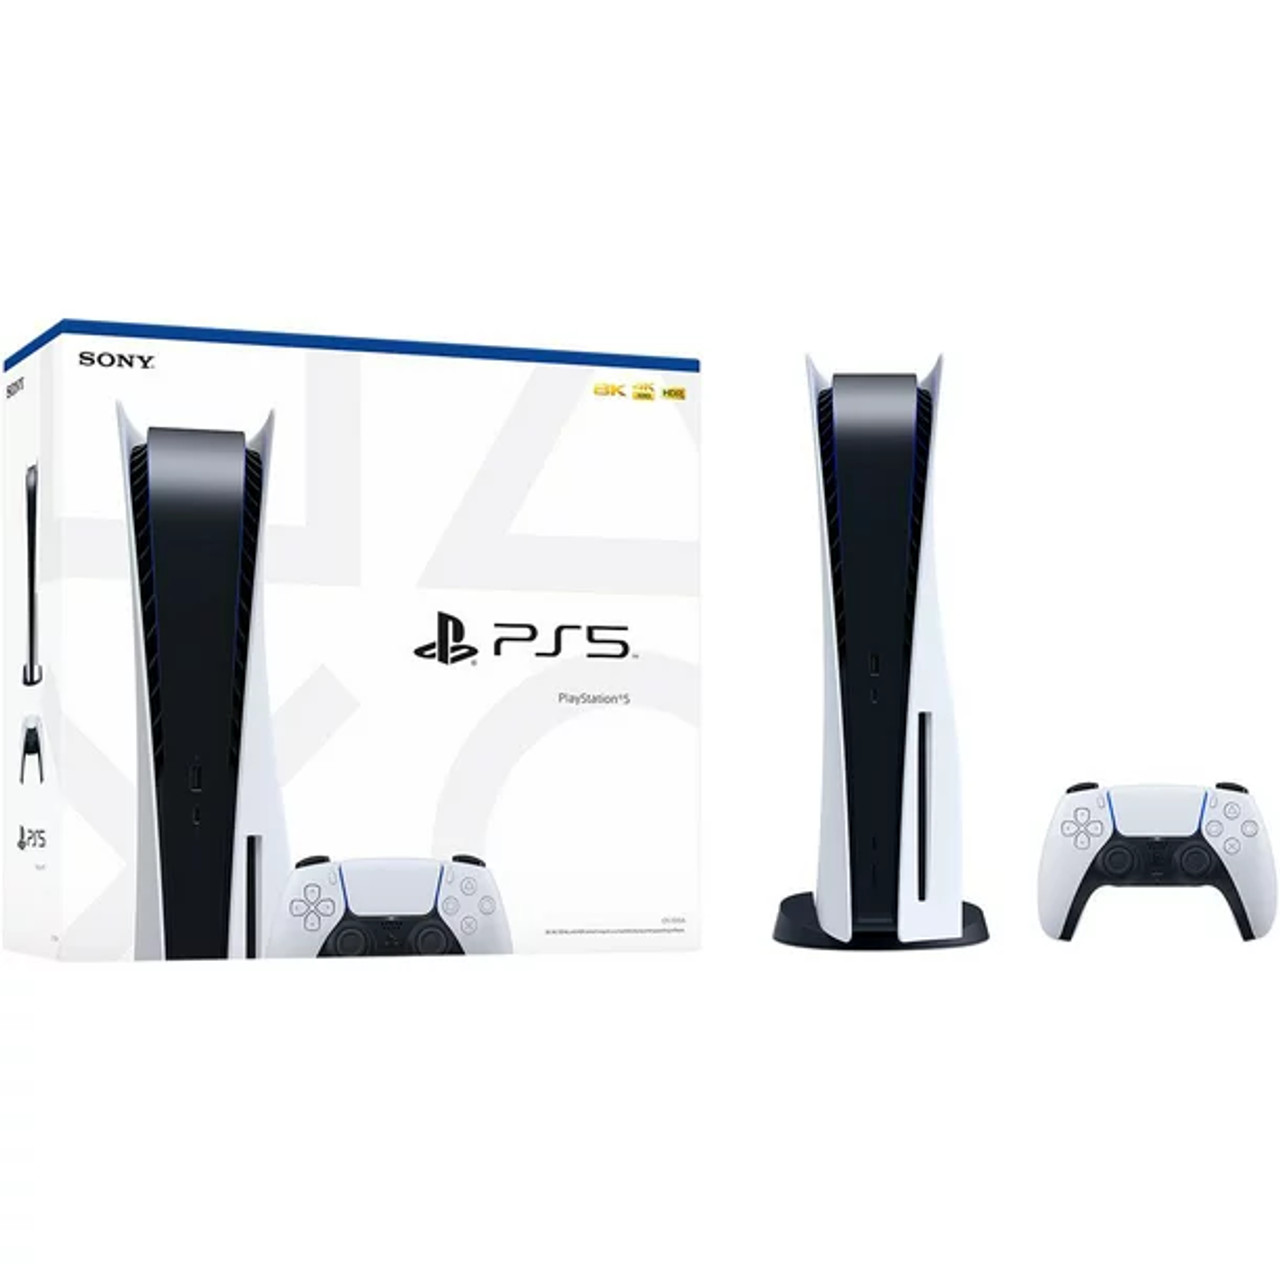 The Sony PlayStation 5 Game System at Bolin serving Clarksville, TN, and and Hopkinsville, KY.